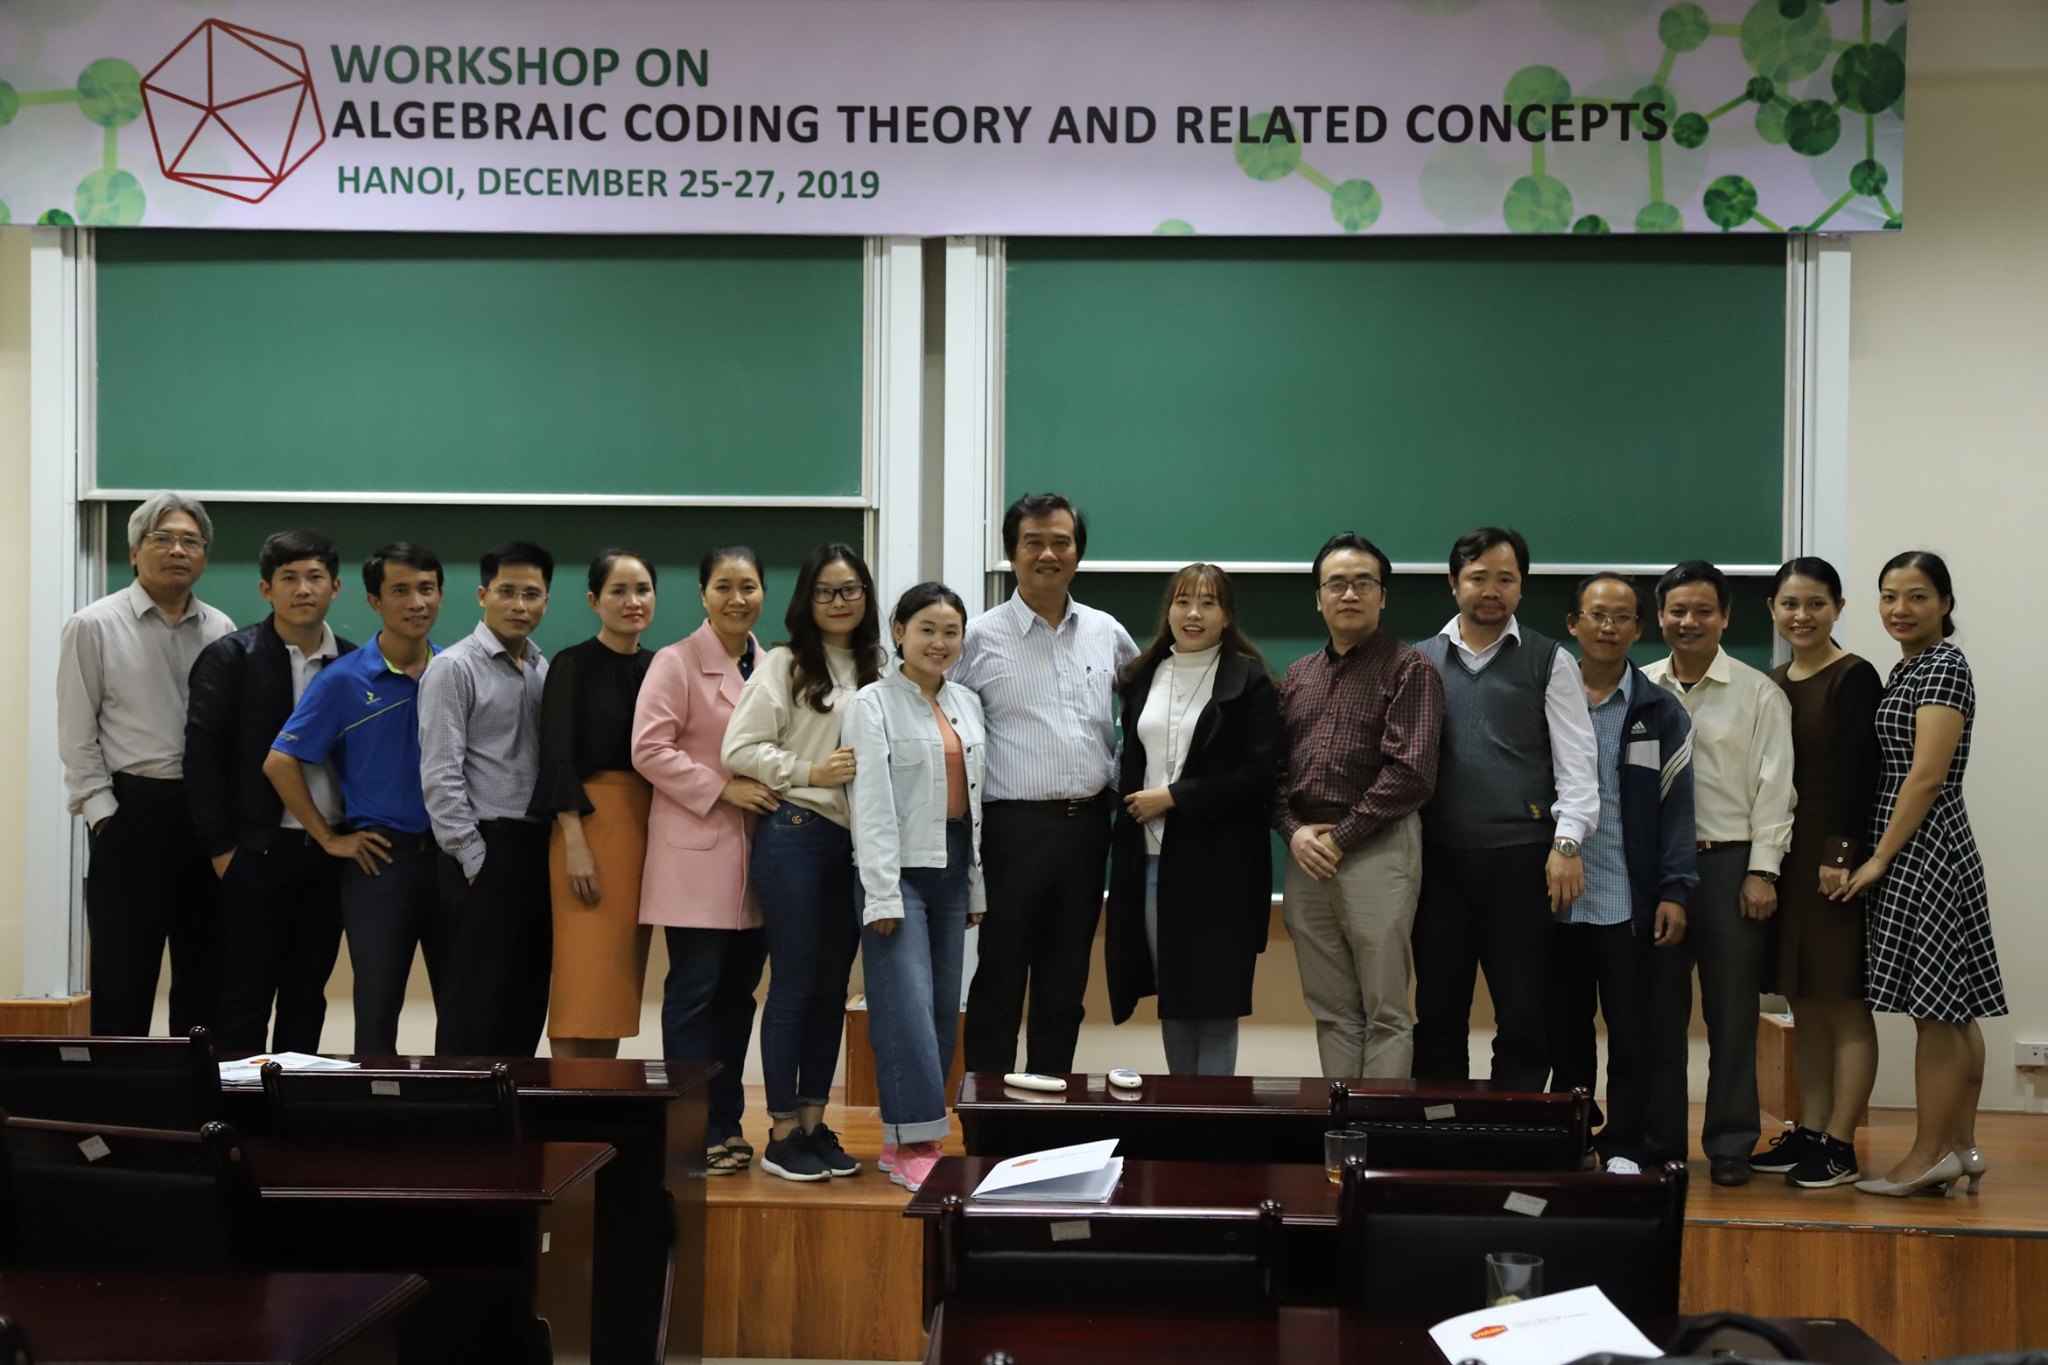 Workshop on Algebraic Coding Theory and Related Concepts